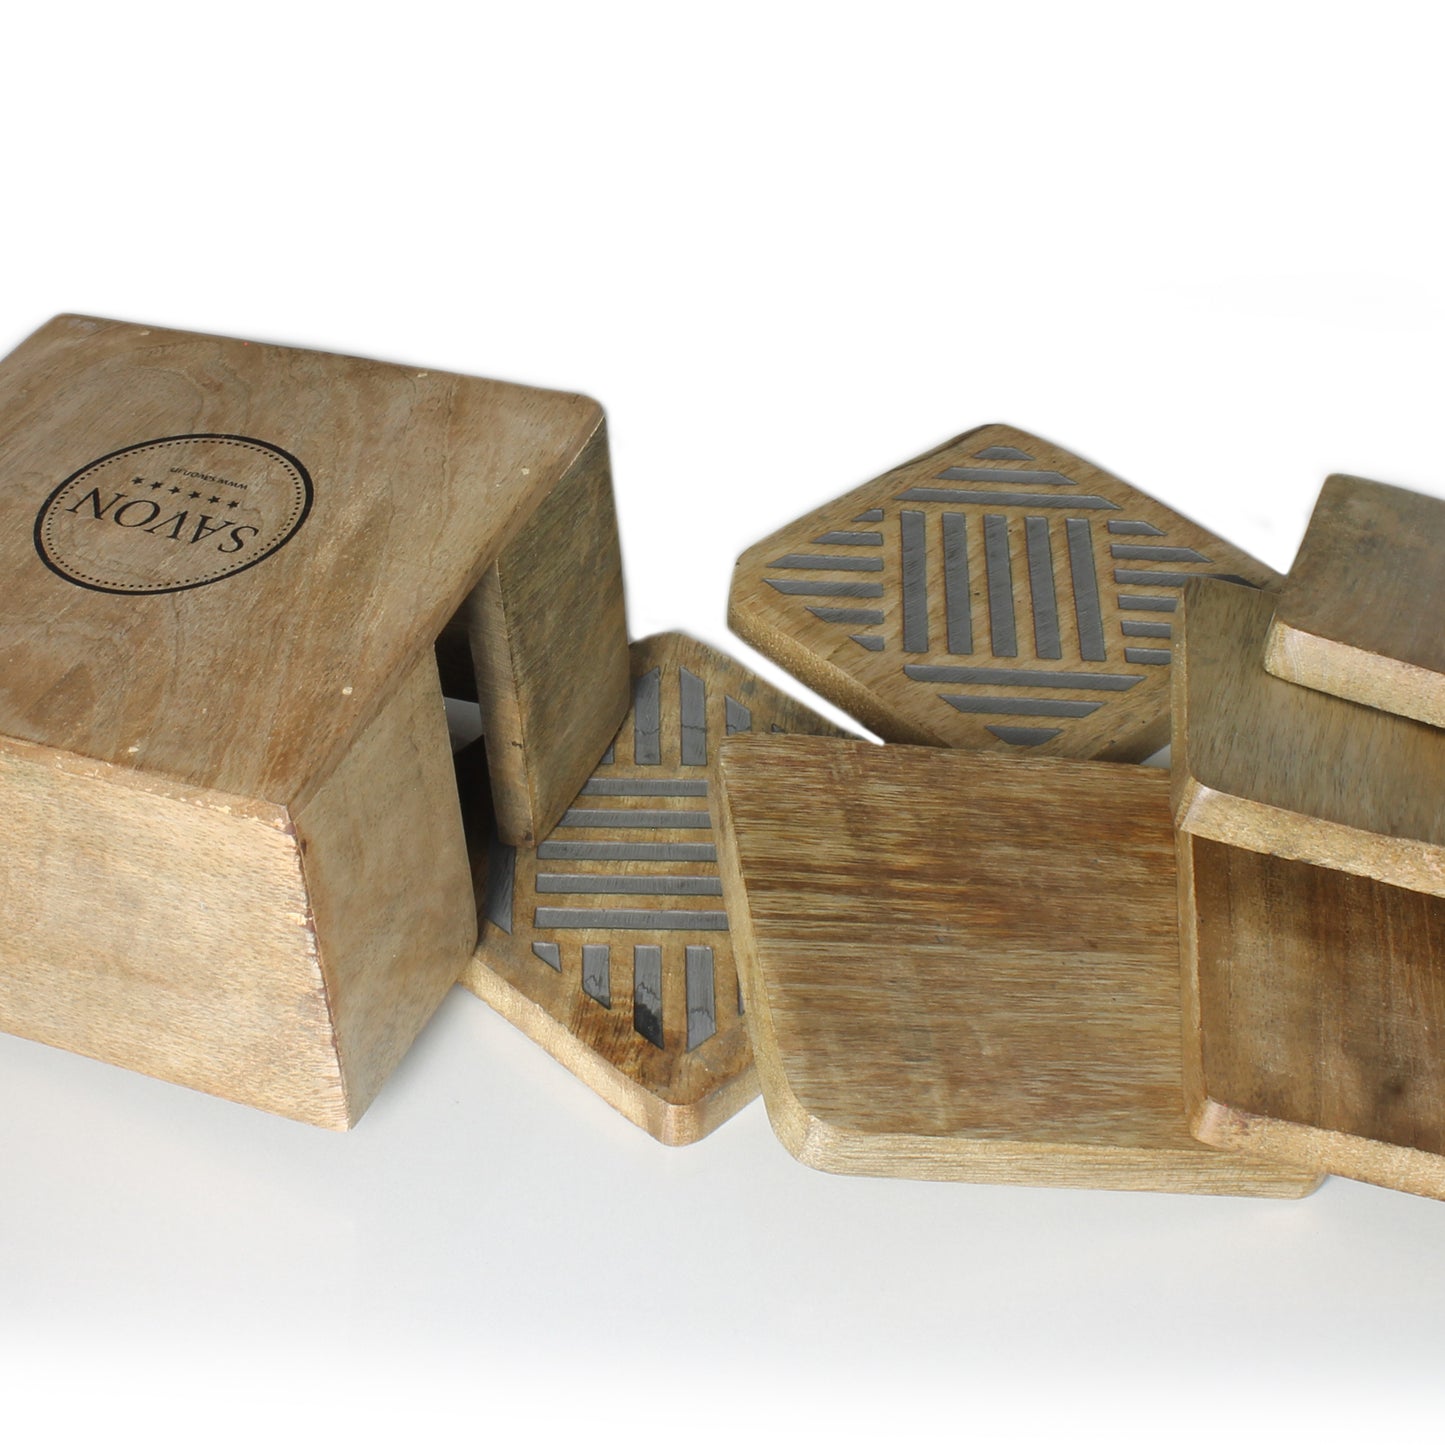 SAVON Wooden Coaster Set of 6 With Holder Square Geometric Lines Gray For Drinks Office Desk